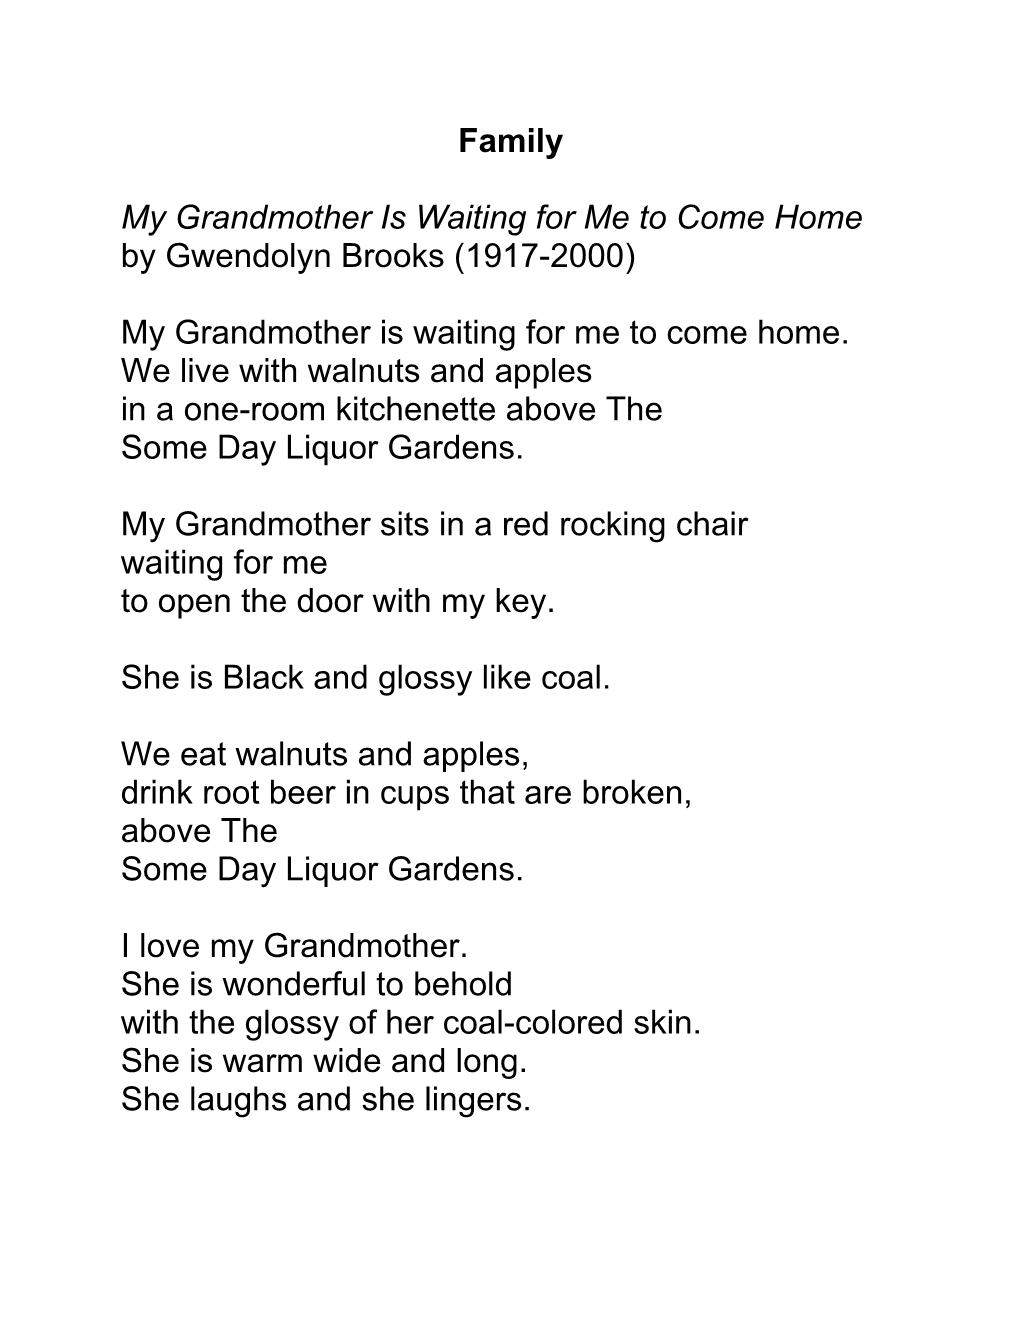 My Grandmother Is Waiting for Me to Come Home by Gwendolyn Brooks (1917-2000)